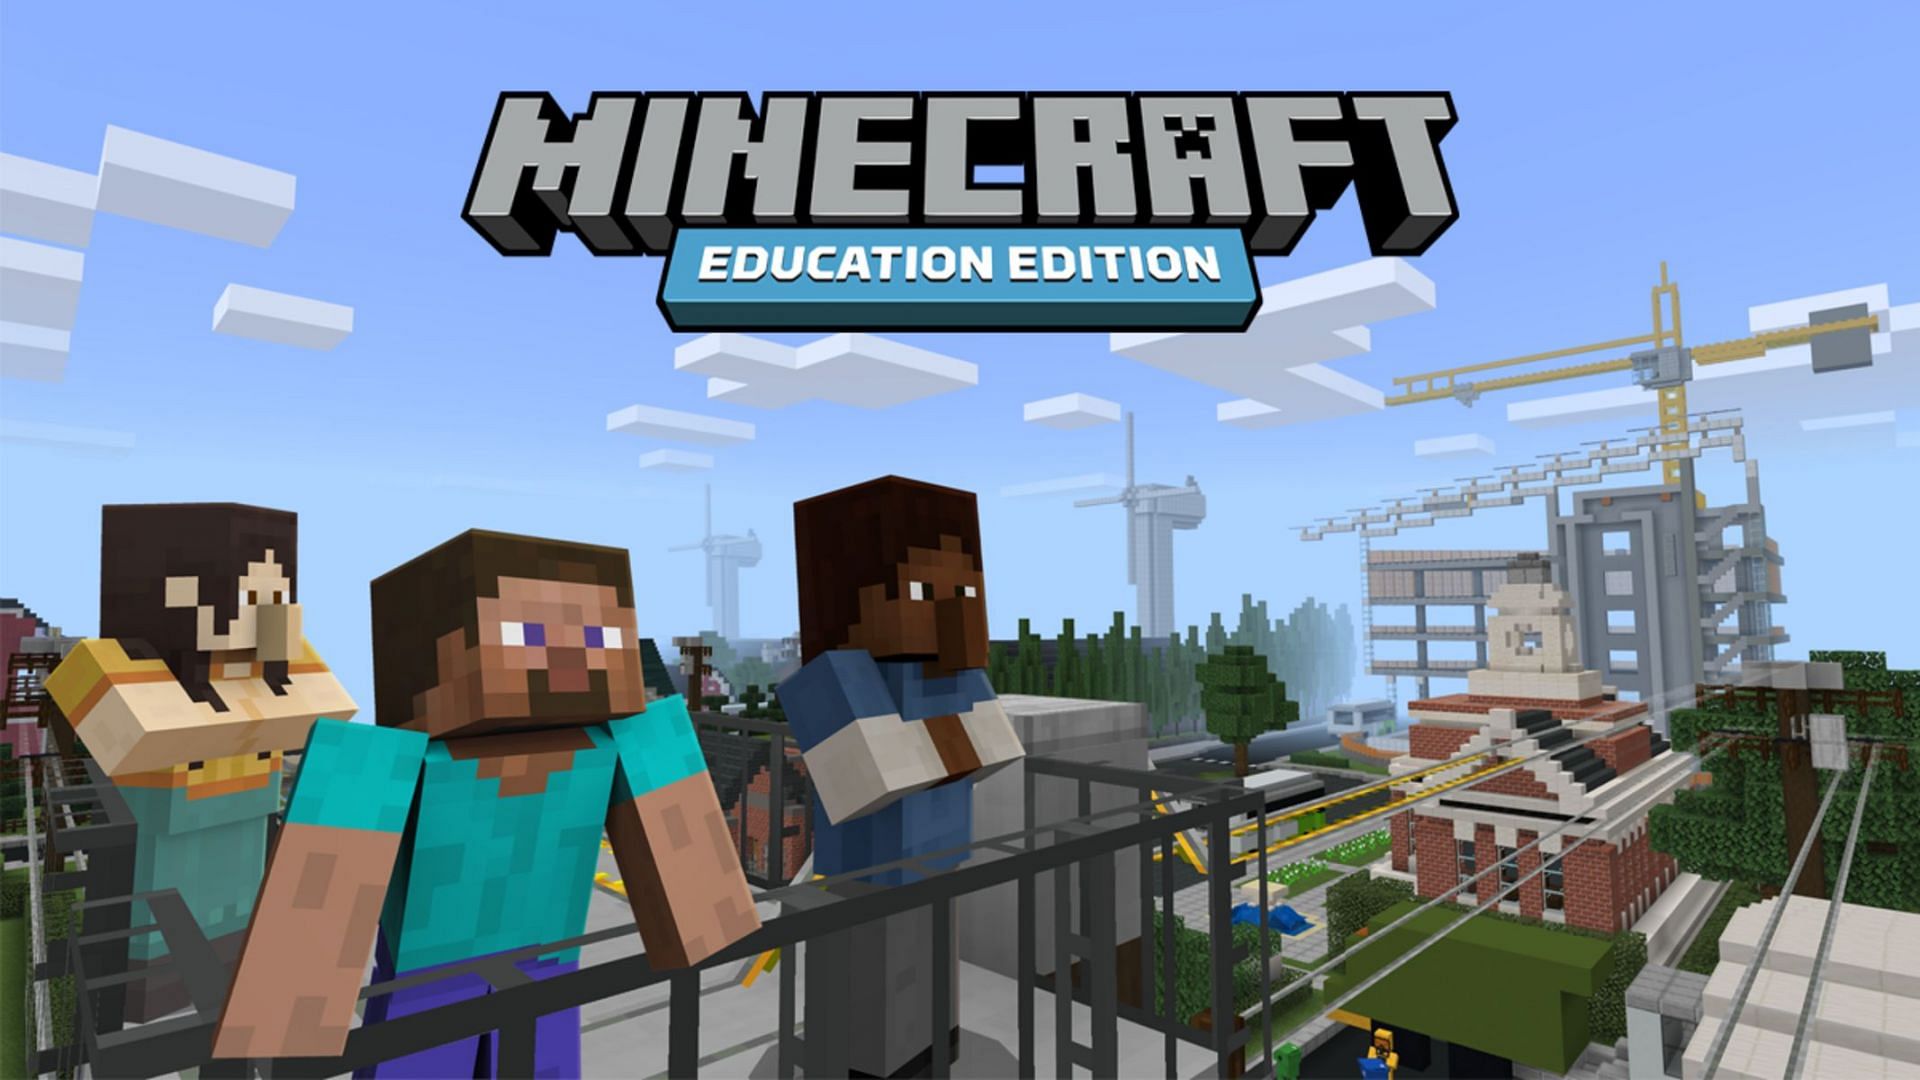 Minecraft: Education Edition may not have great mod capability, but its add-ons make up for it (Image via Mojang)